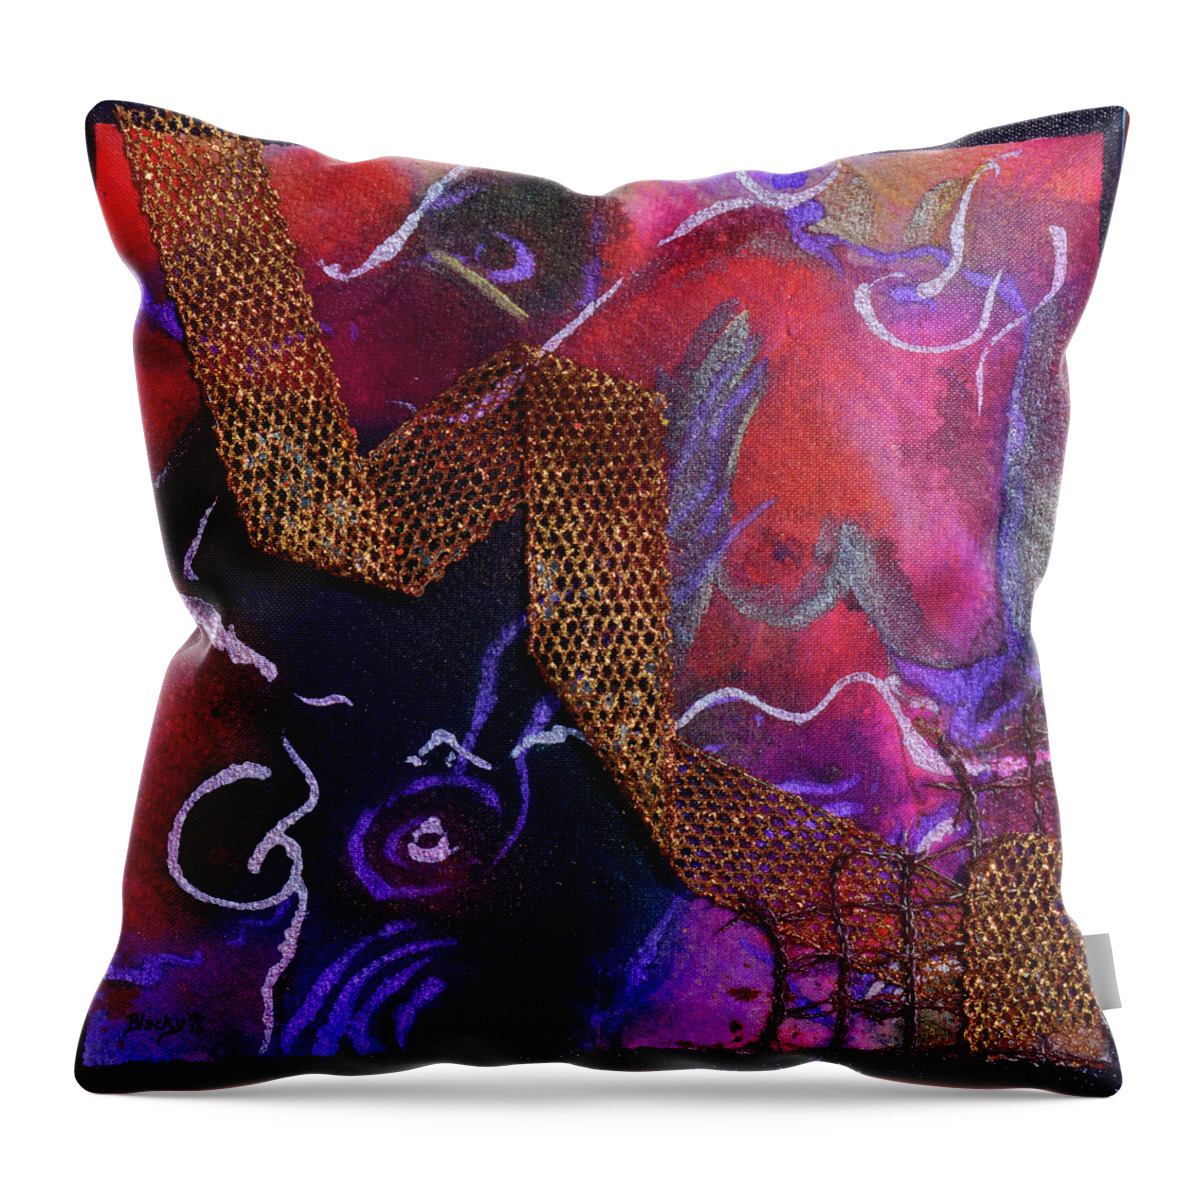 Spy Throw Pillow featuring the painting The Spy Who Loved Me by Donna Blackhall